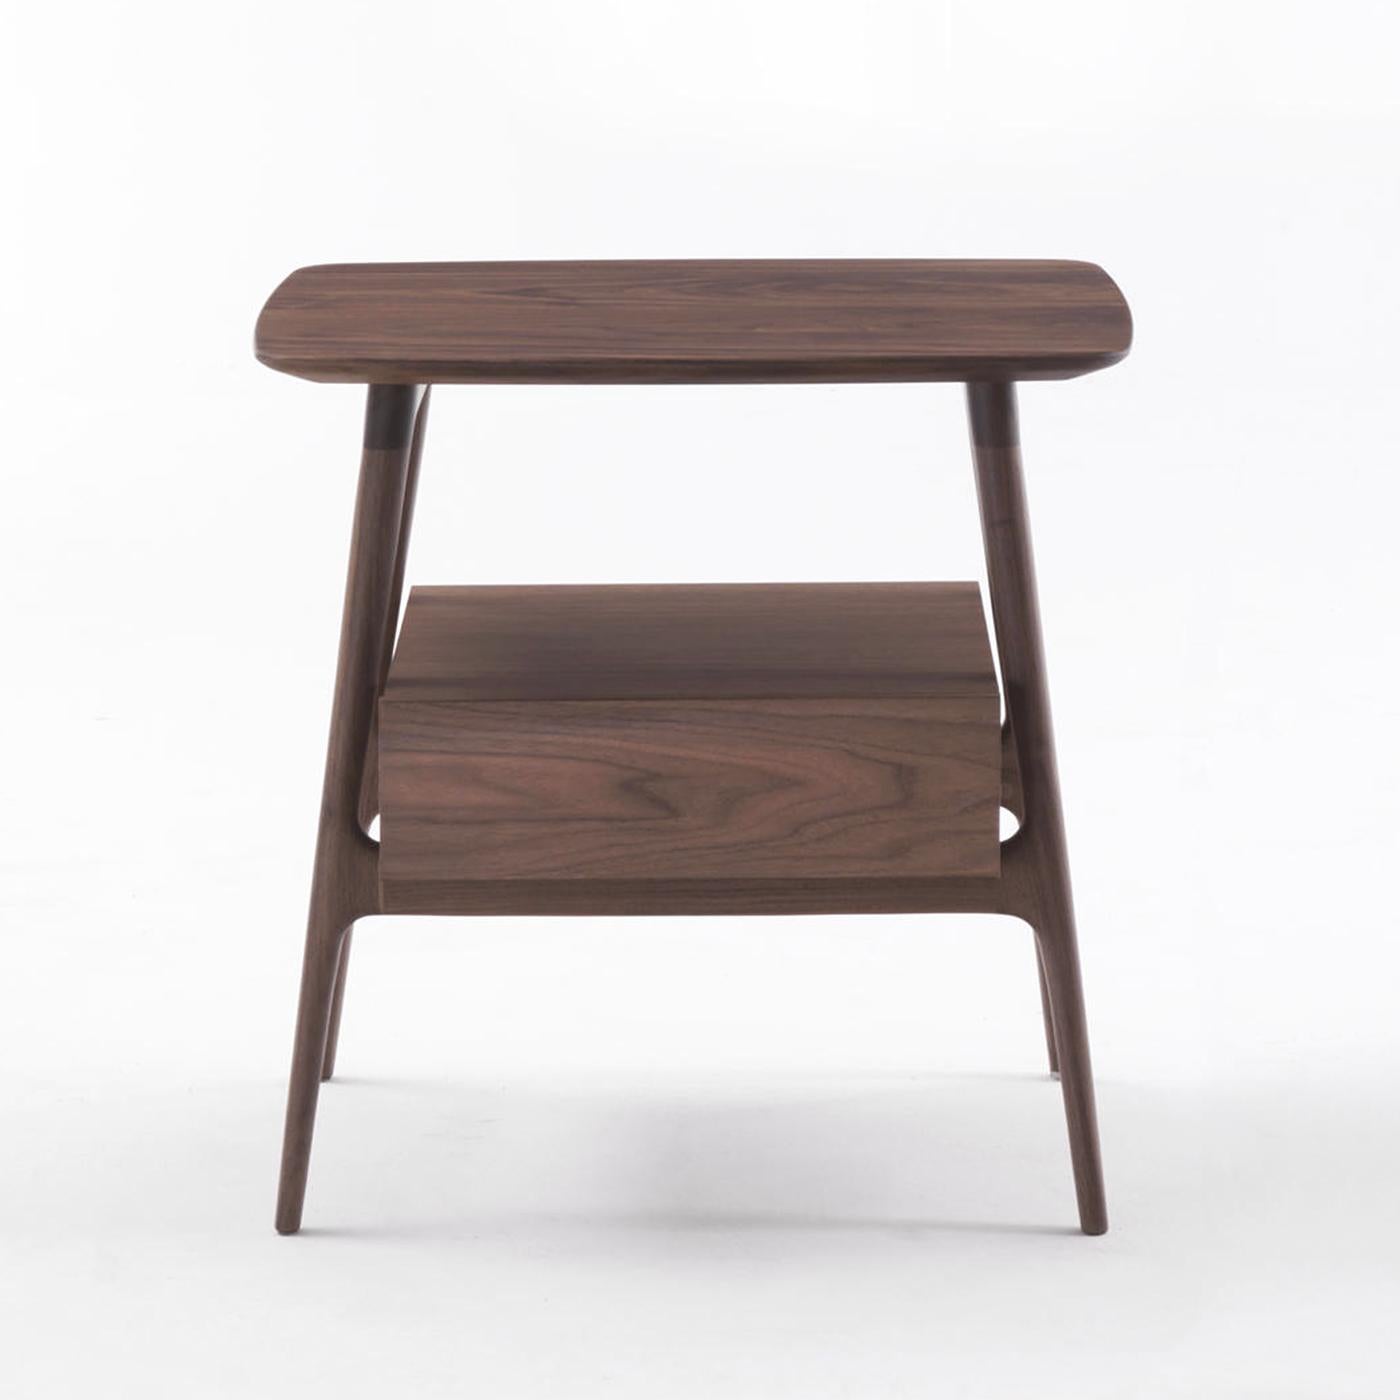 Side table millas with structure in 
solid walnut wood, include 1 drawer.